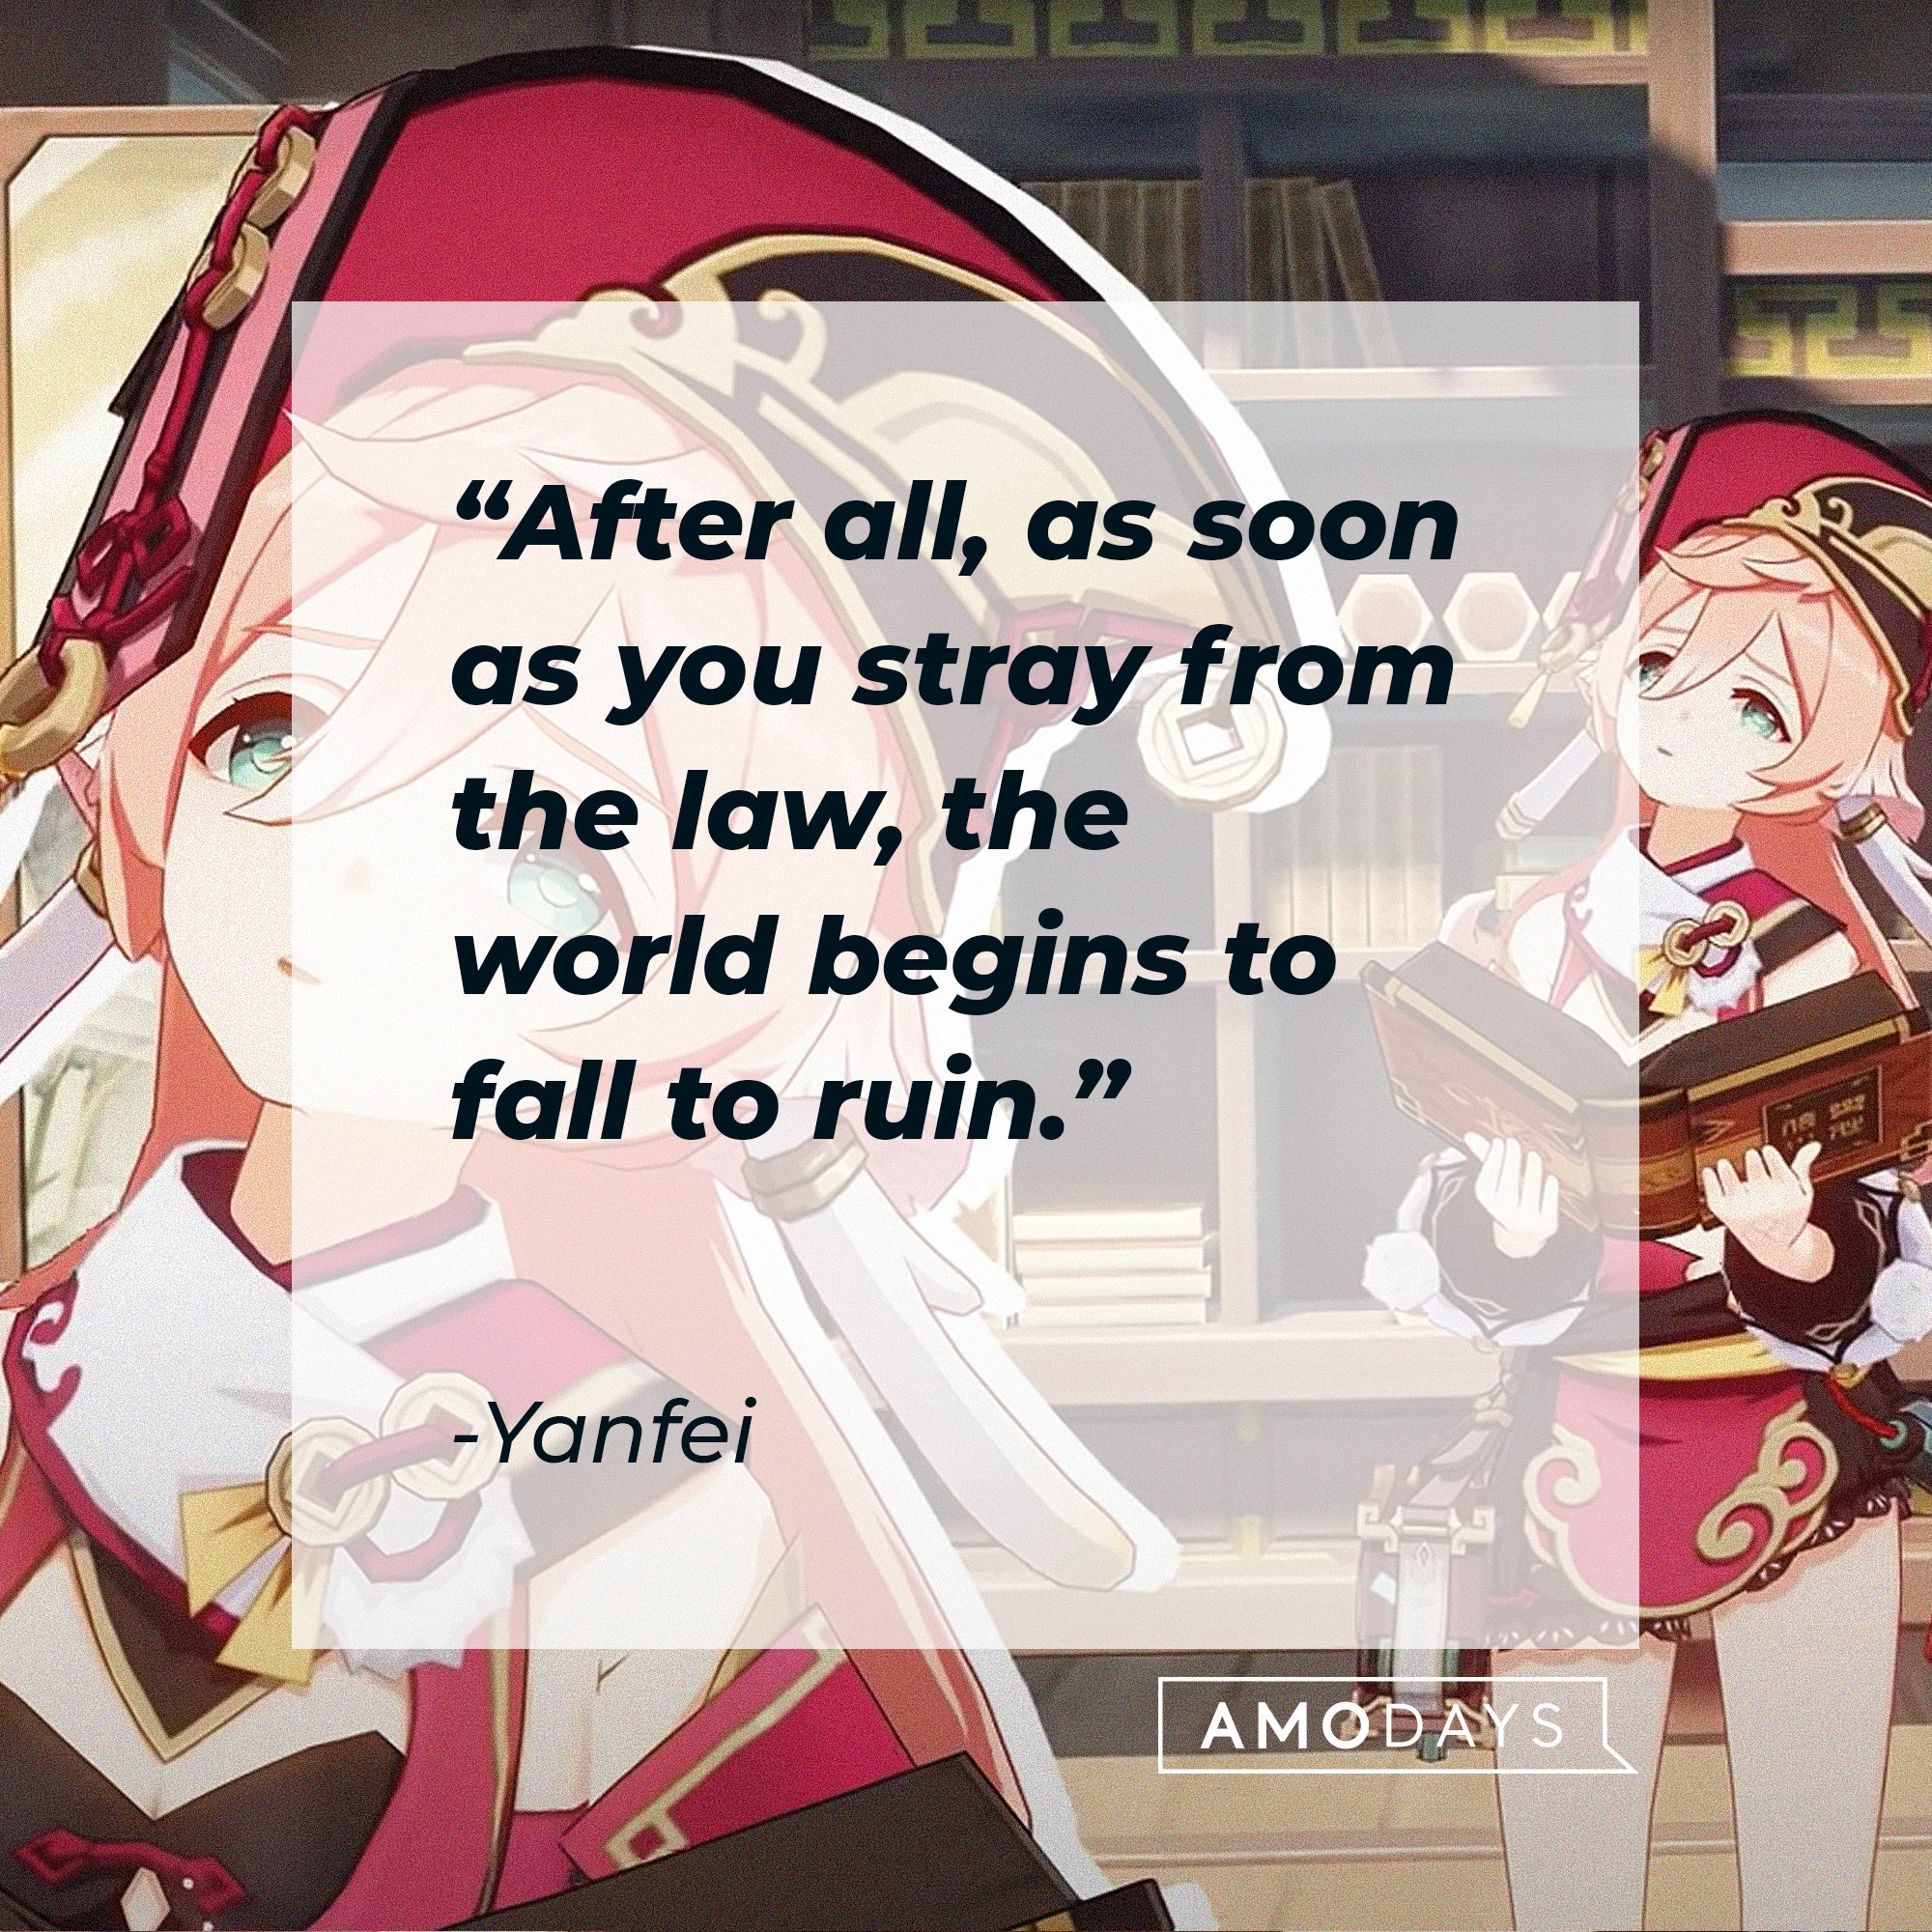 Yanfei’s quote: "After all, as soon as you stray from the law, the world begins to fall to ruin." | Image: AmoDays